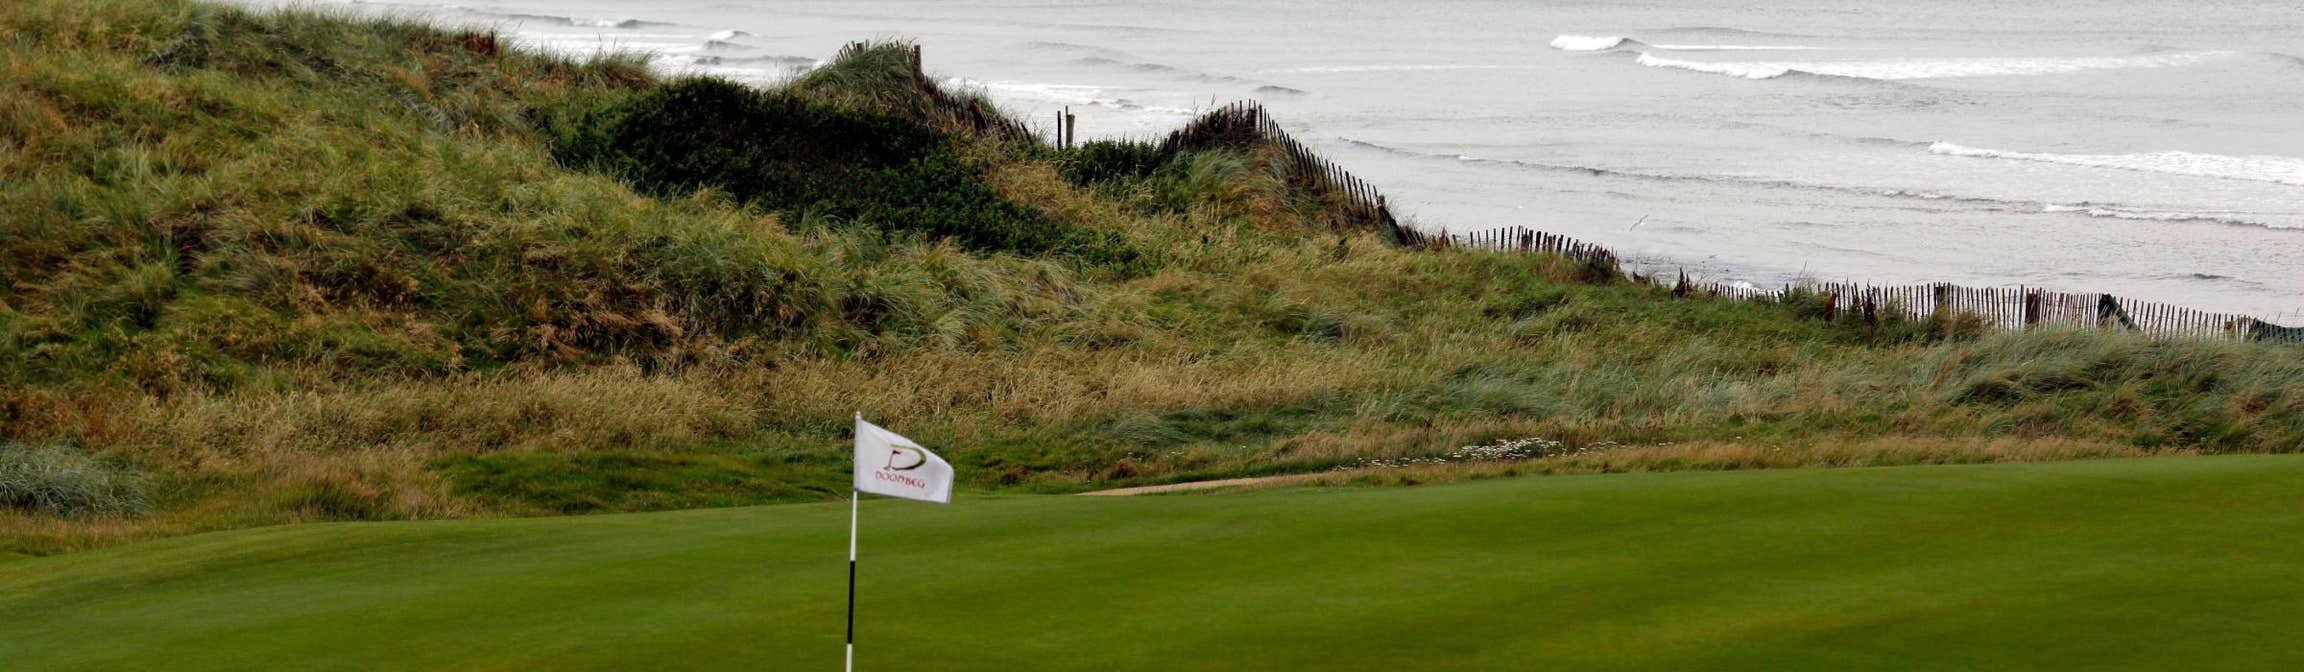 Image of Doonbeg Golf Club in County Clare